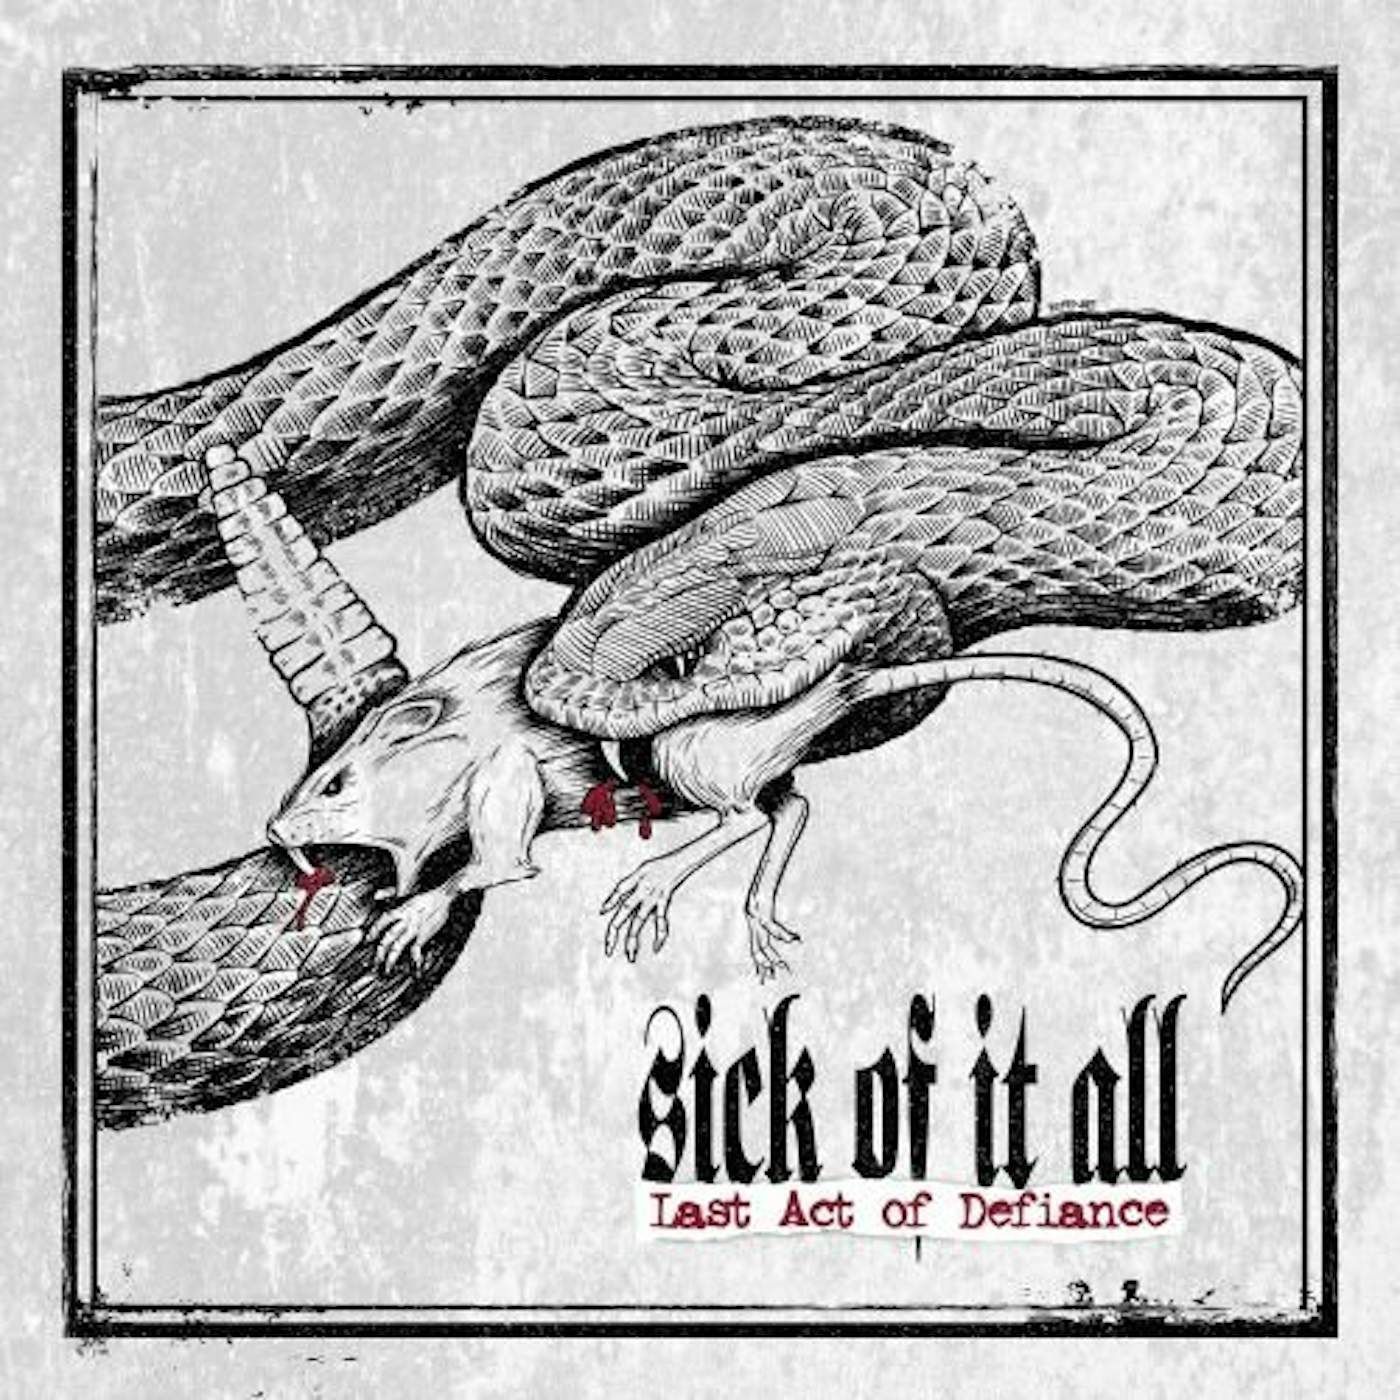 Sick Of It All LAST ACT IF DEFIANCE Vinyl Record